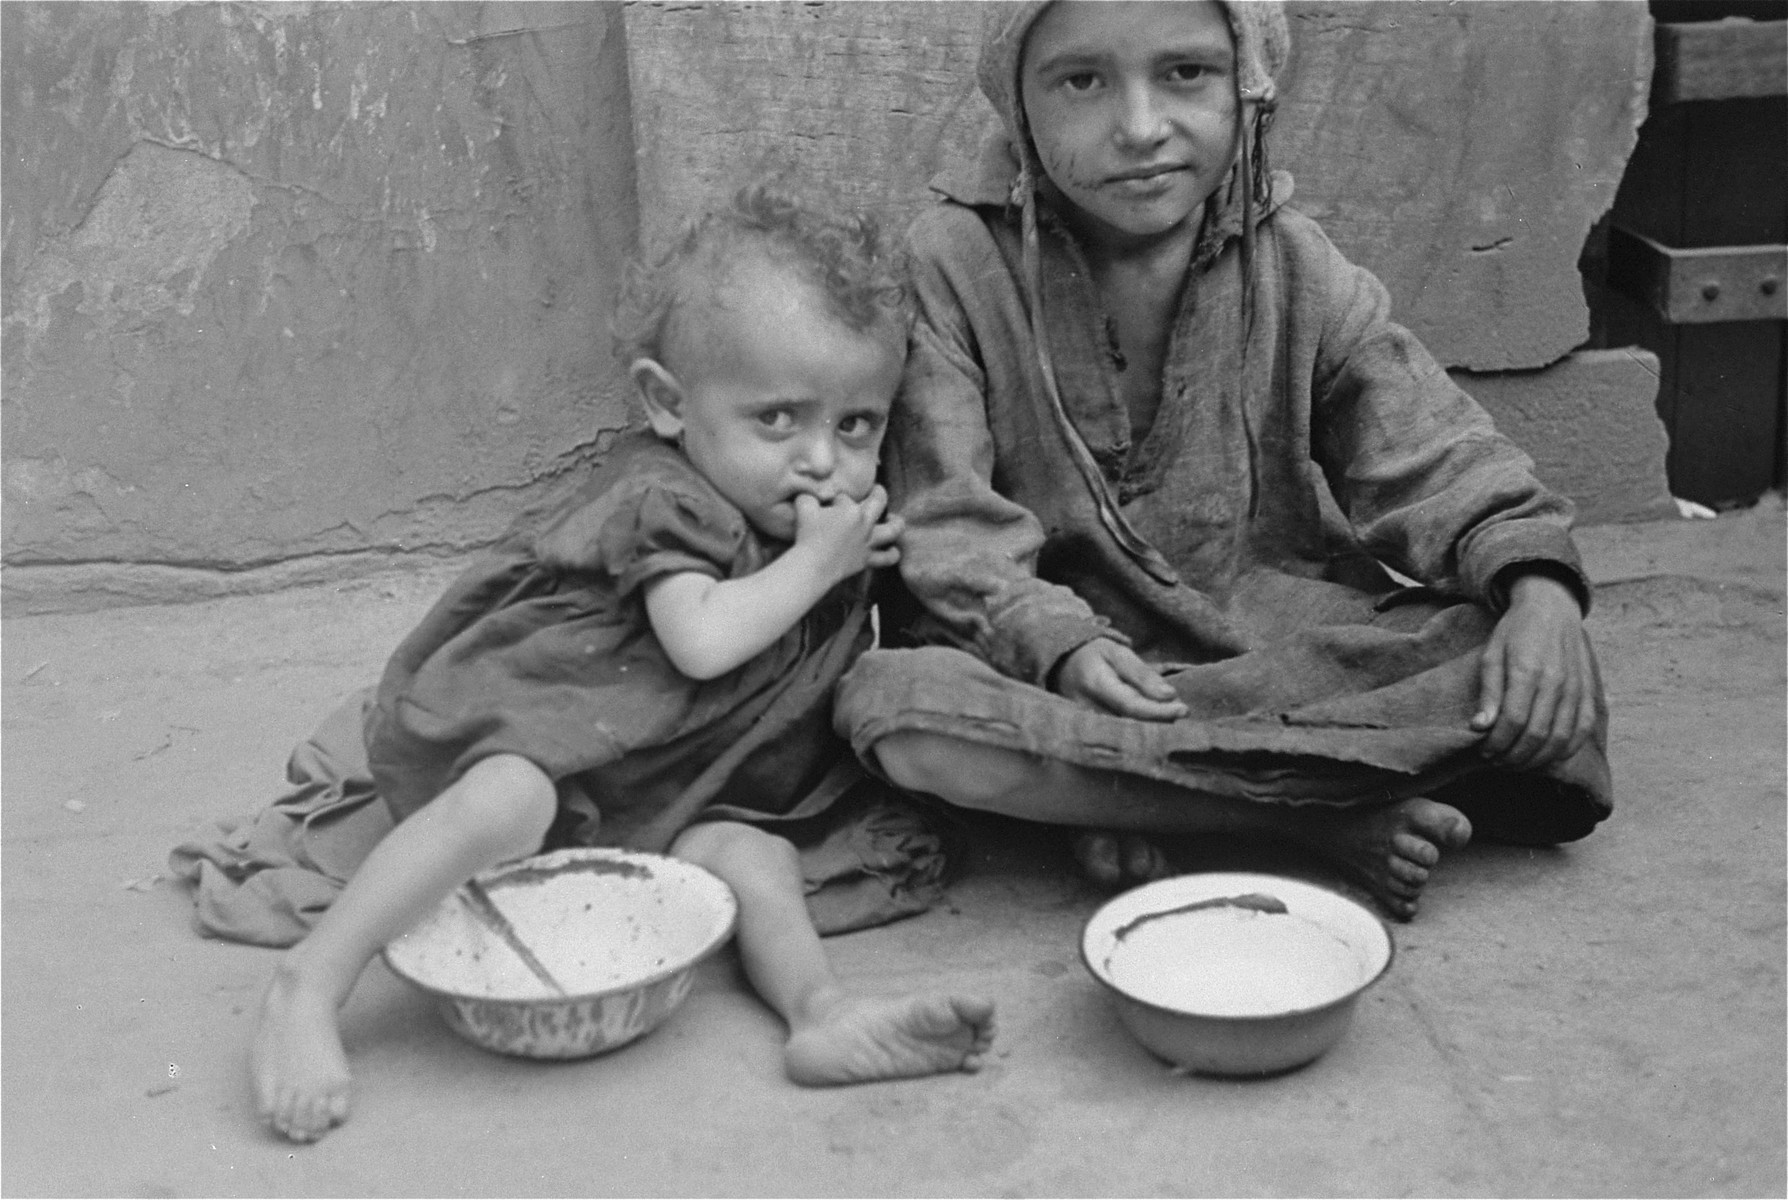 Two destitute children sit with empty bowls on a street in the Warsaw ghetto.